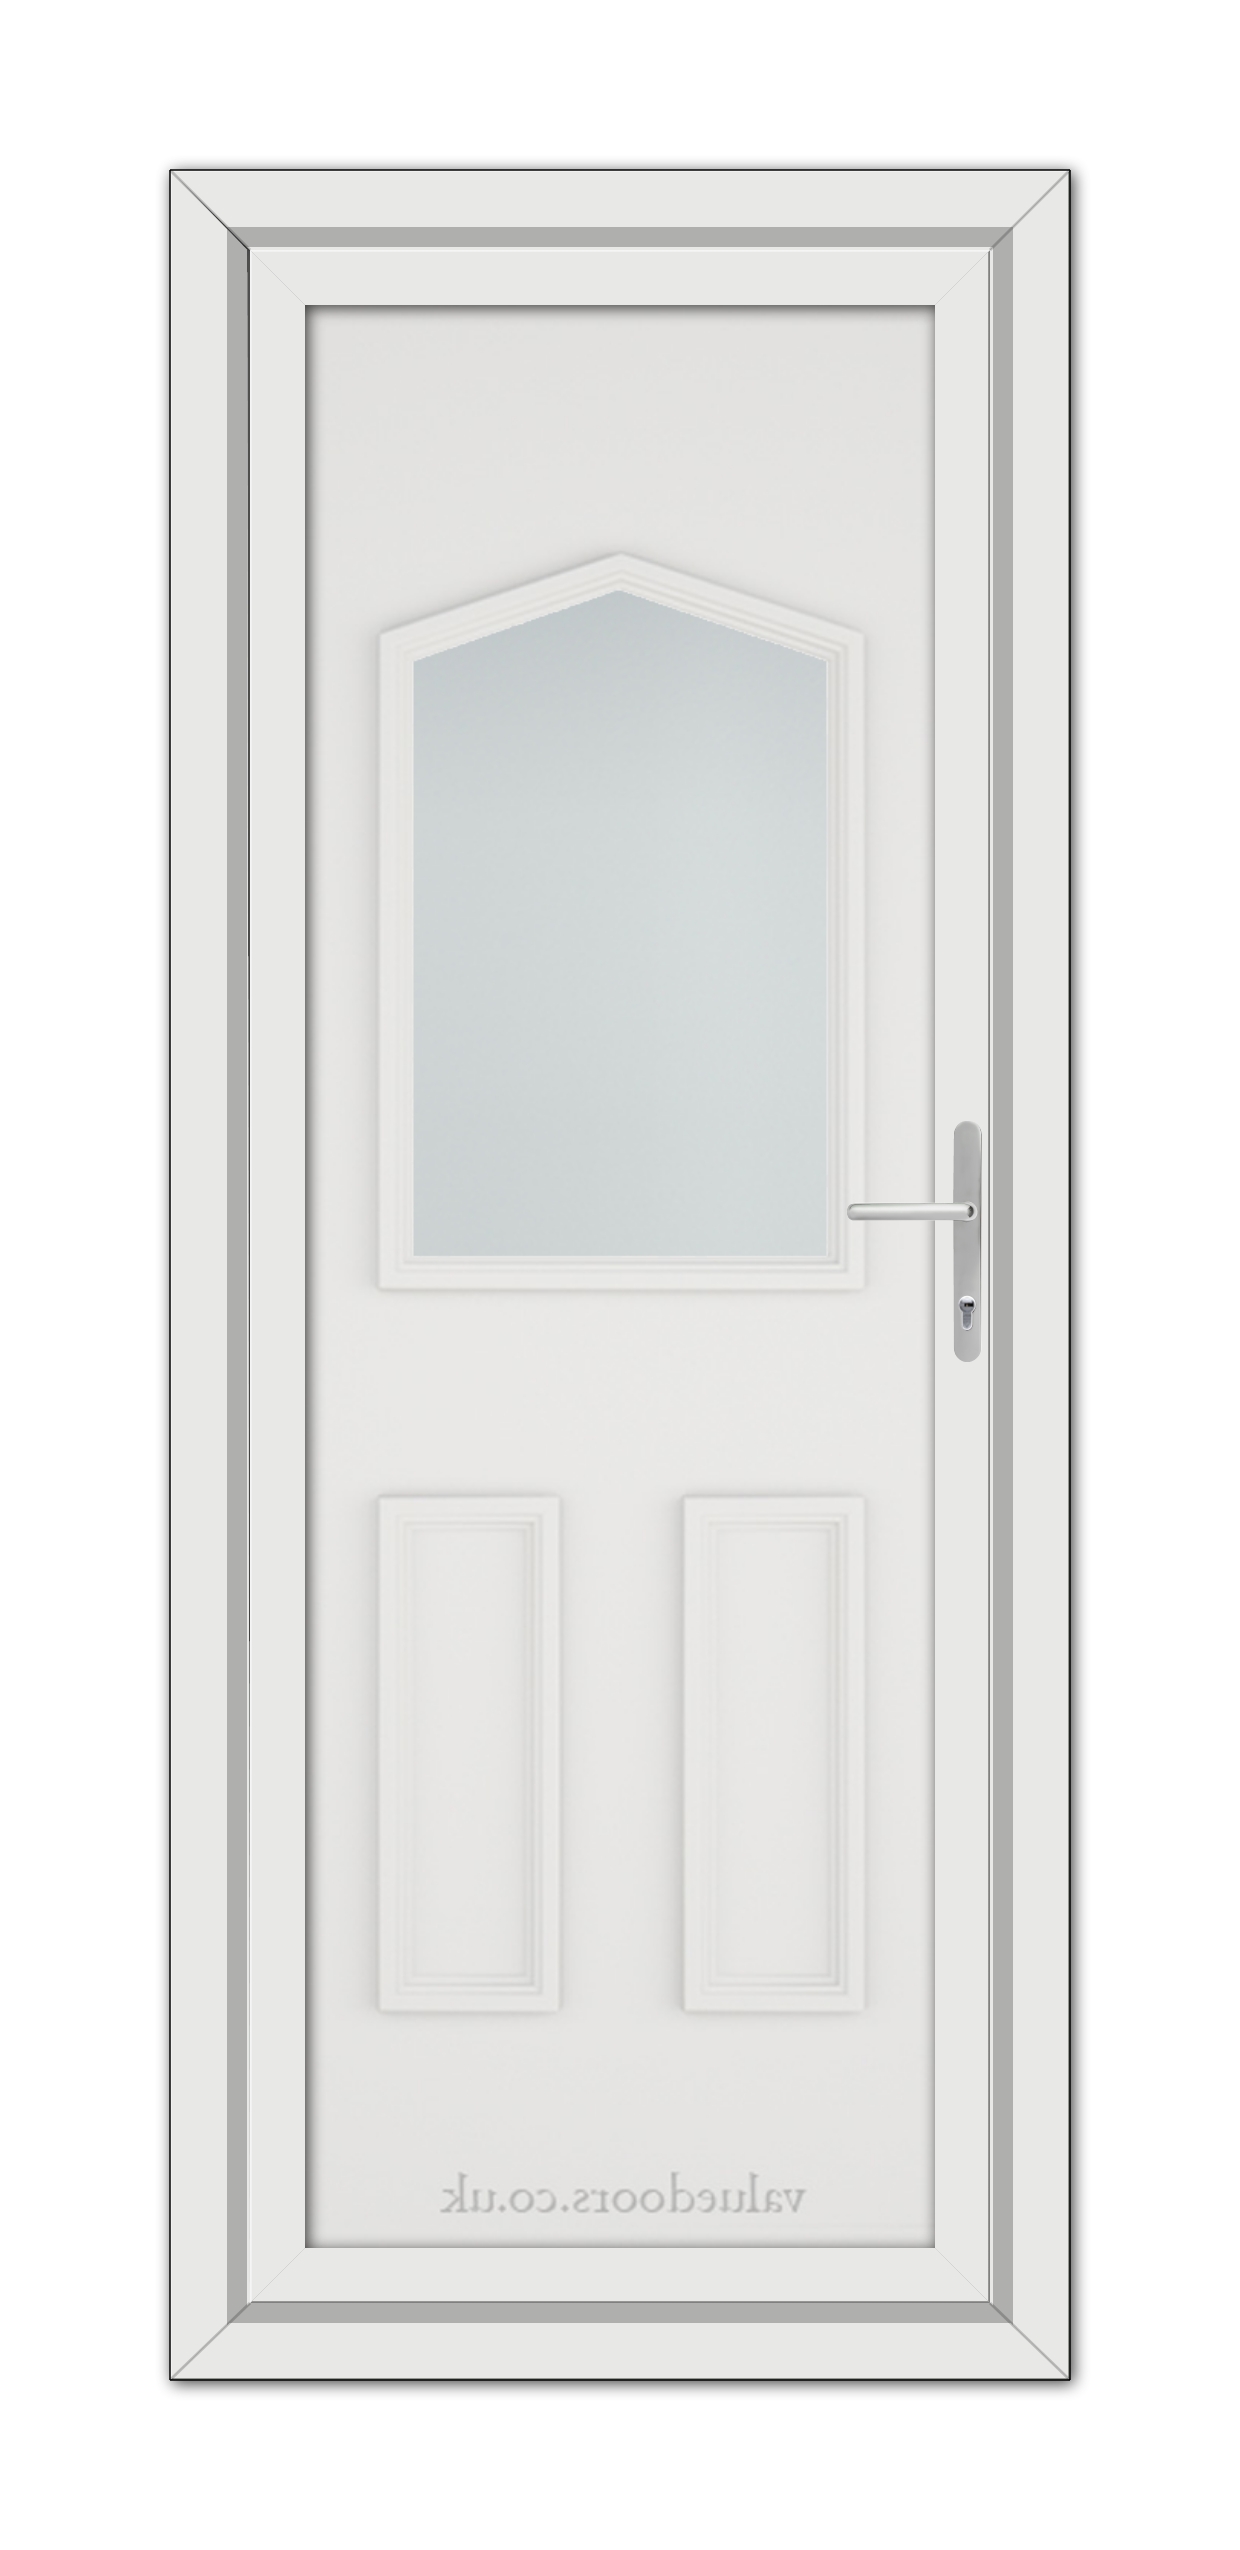 A White Oxford uPVC Door with an arched window at the top, two recessed panels below, and a metallic handle on the right.